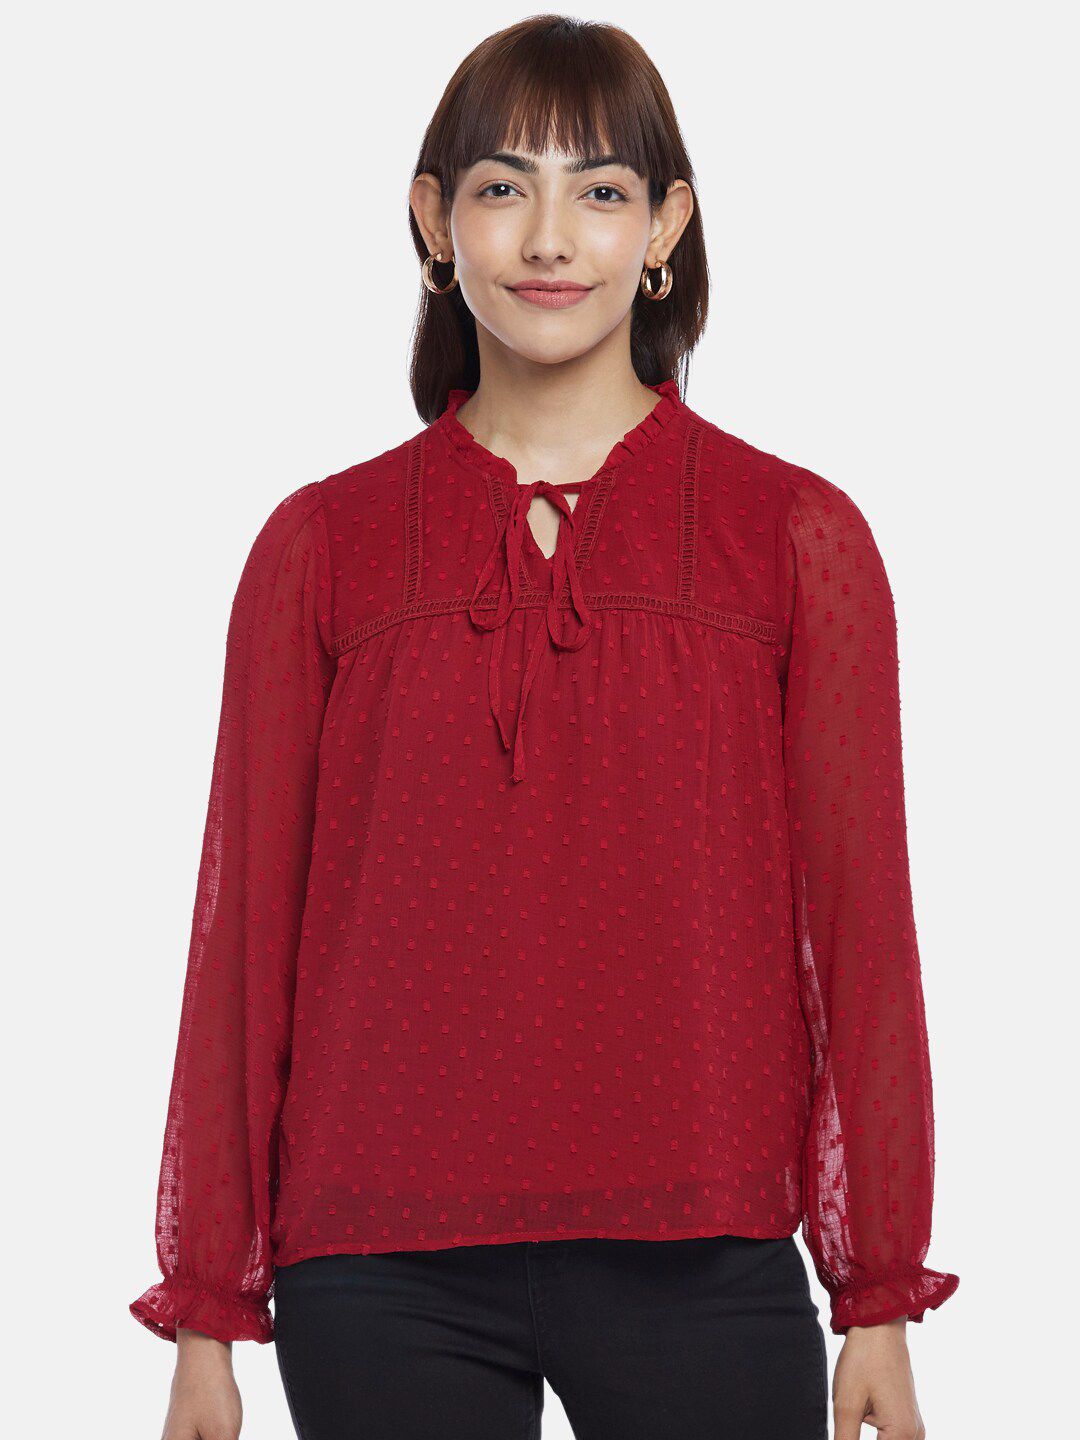 Honey by Pantaloons Women Maroon Tie-Up Neck Top Price in India